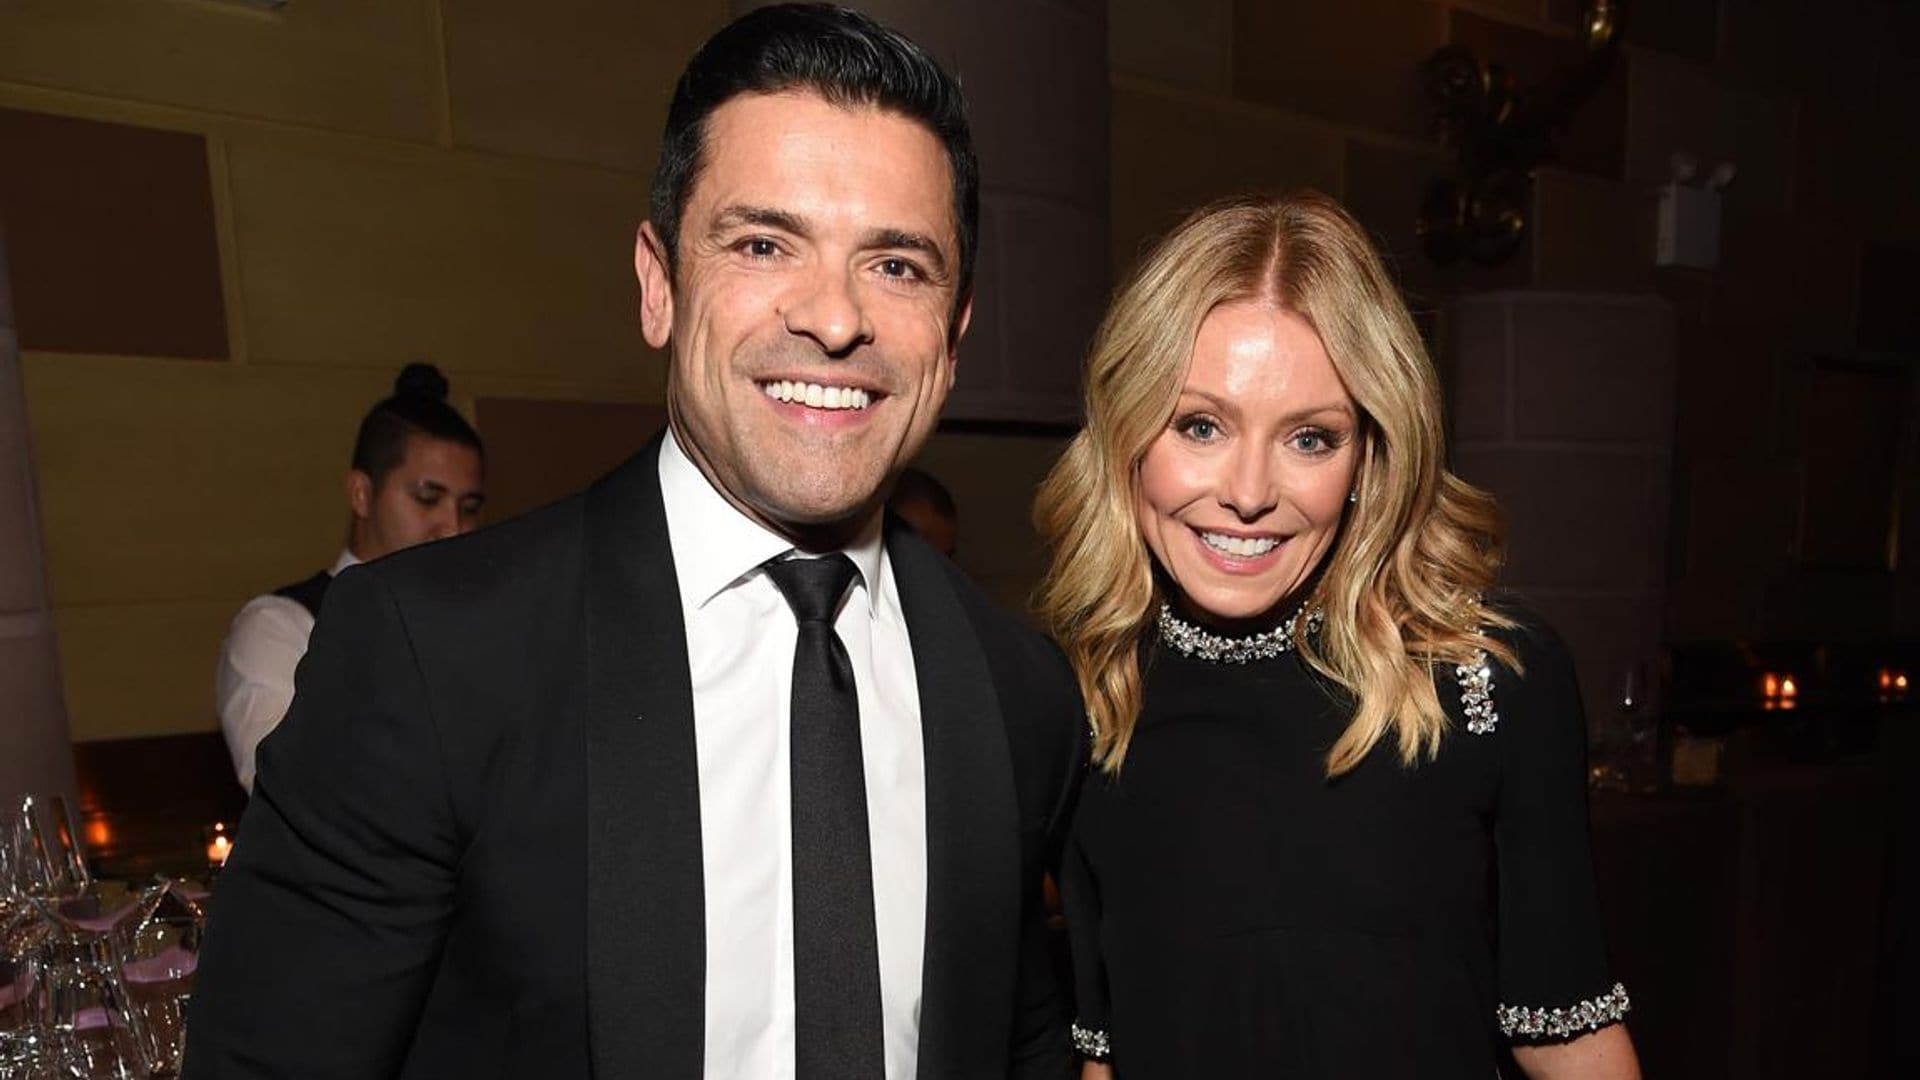 Kelly Ripa says Mark Consuelos made having more kids easy in sweetest post ever